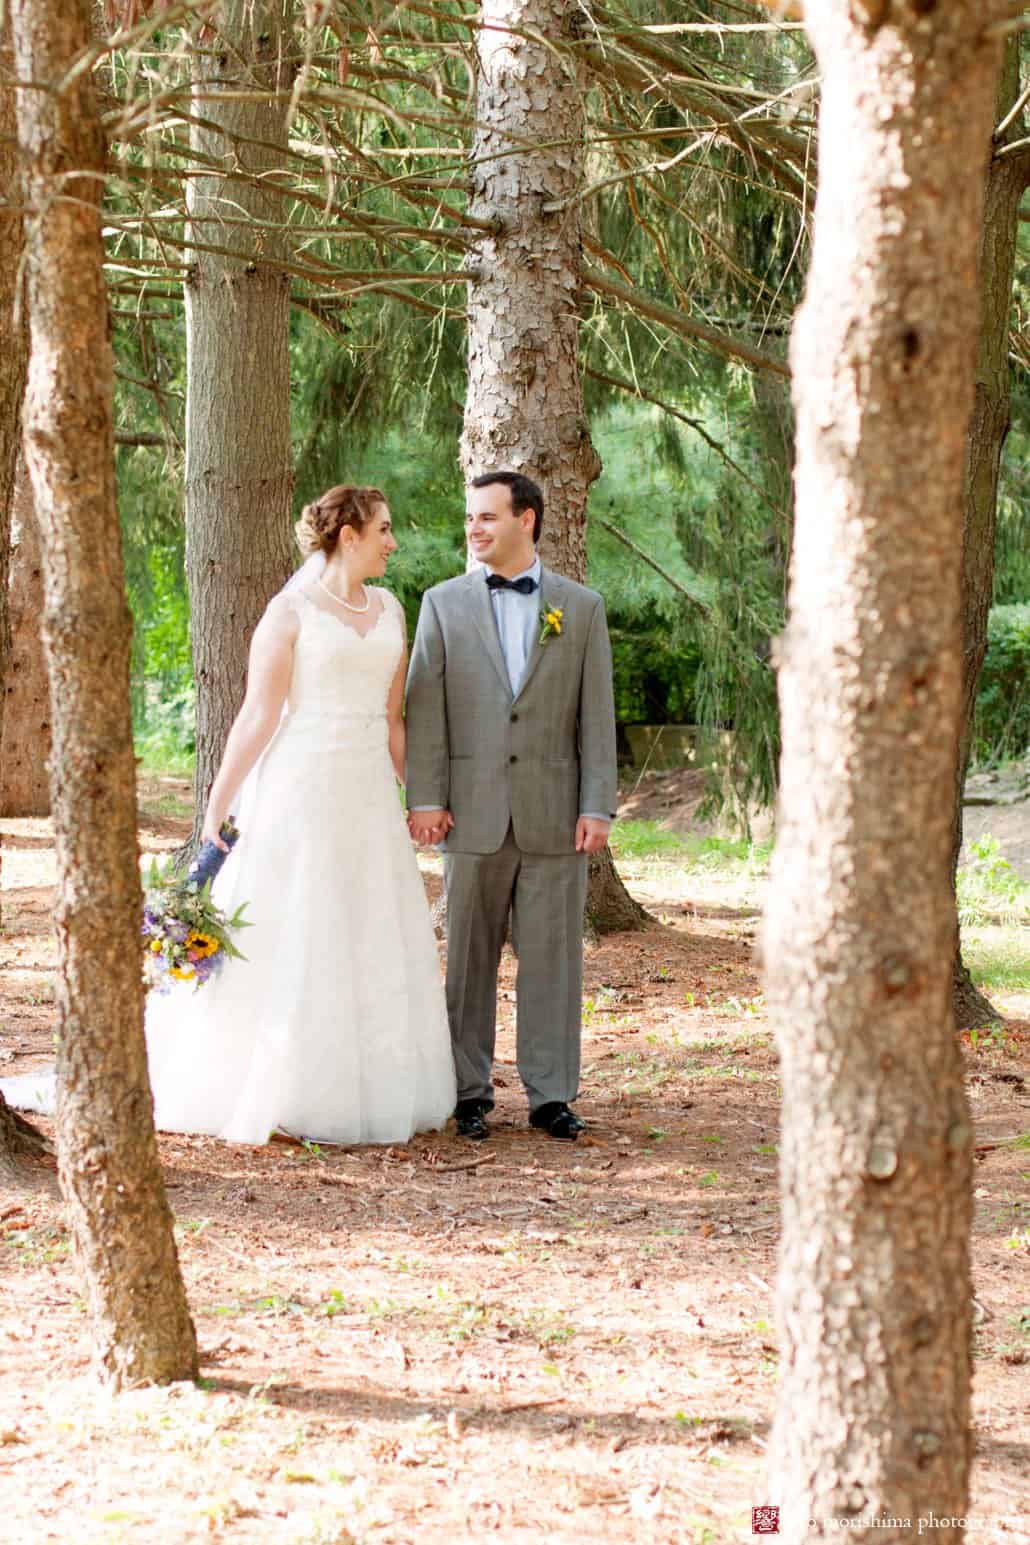 Bride and groom go for a walk through pine grove at Perona Farms photographed by Sussex County wedding photographer Kyo Morishima